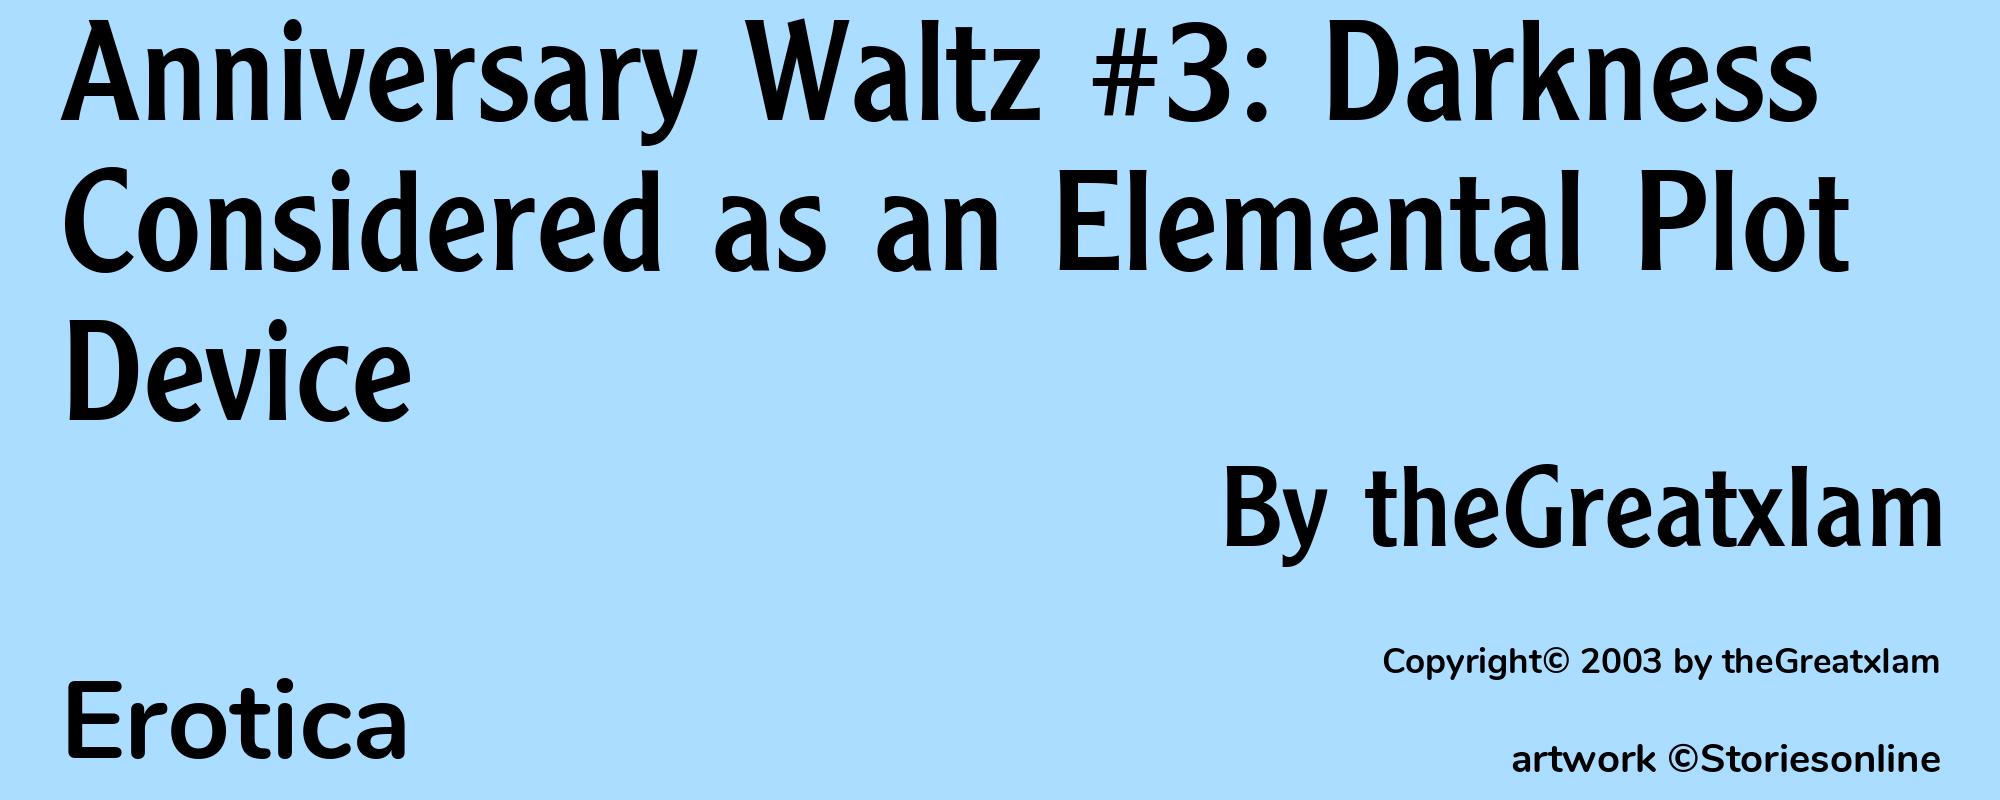 Anniversary Waltz #3: Darkness Considered as an Elemental Plot Device - Cover